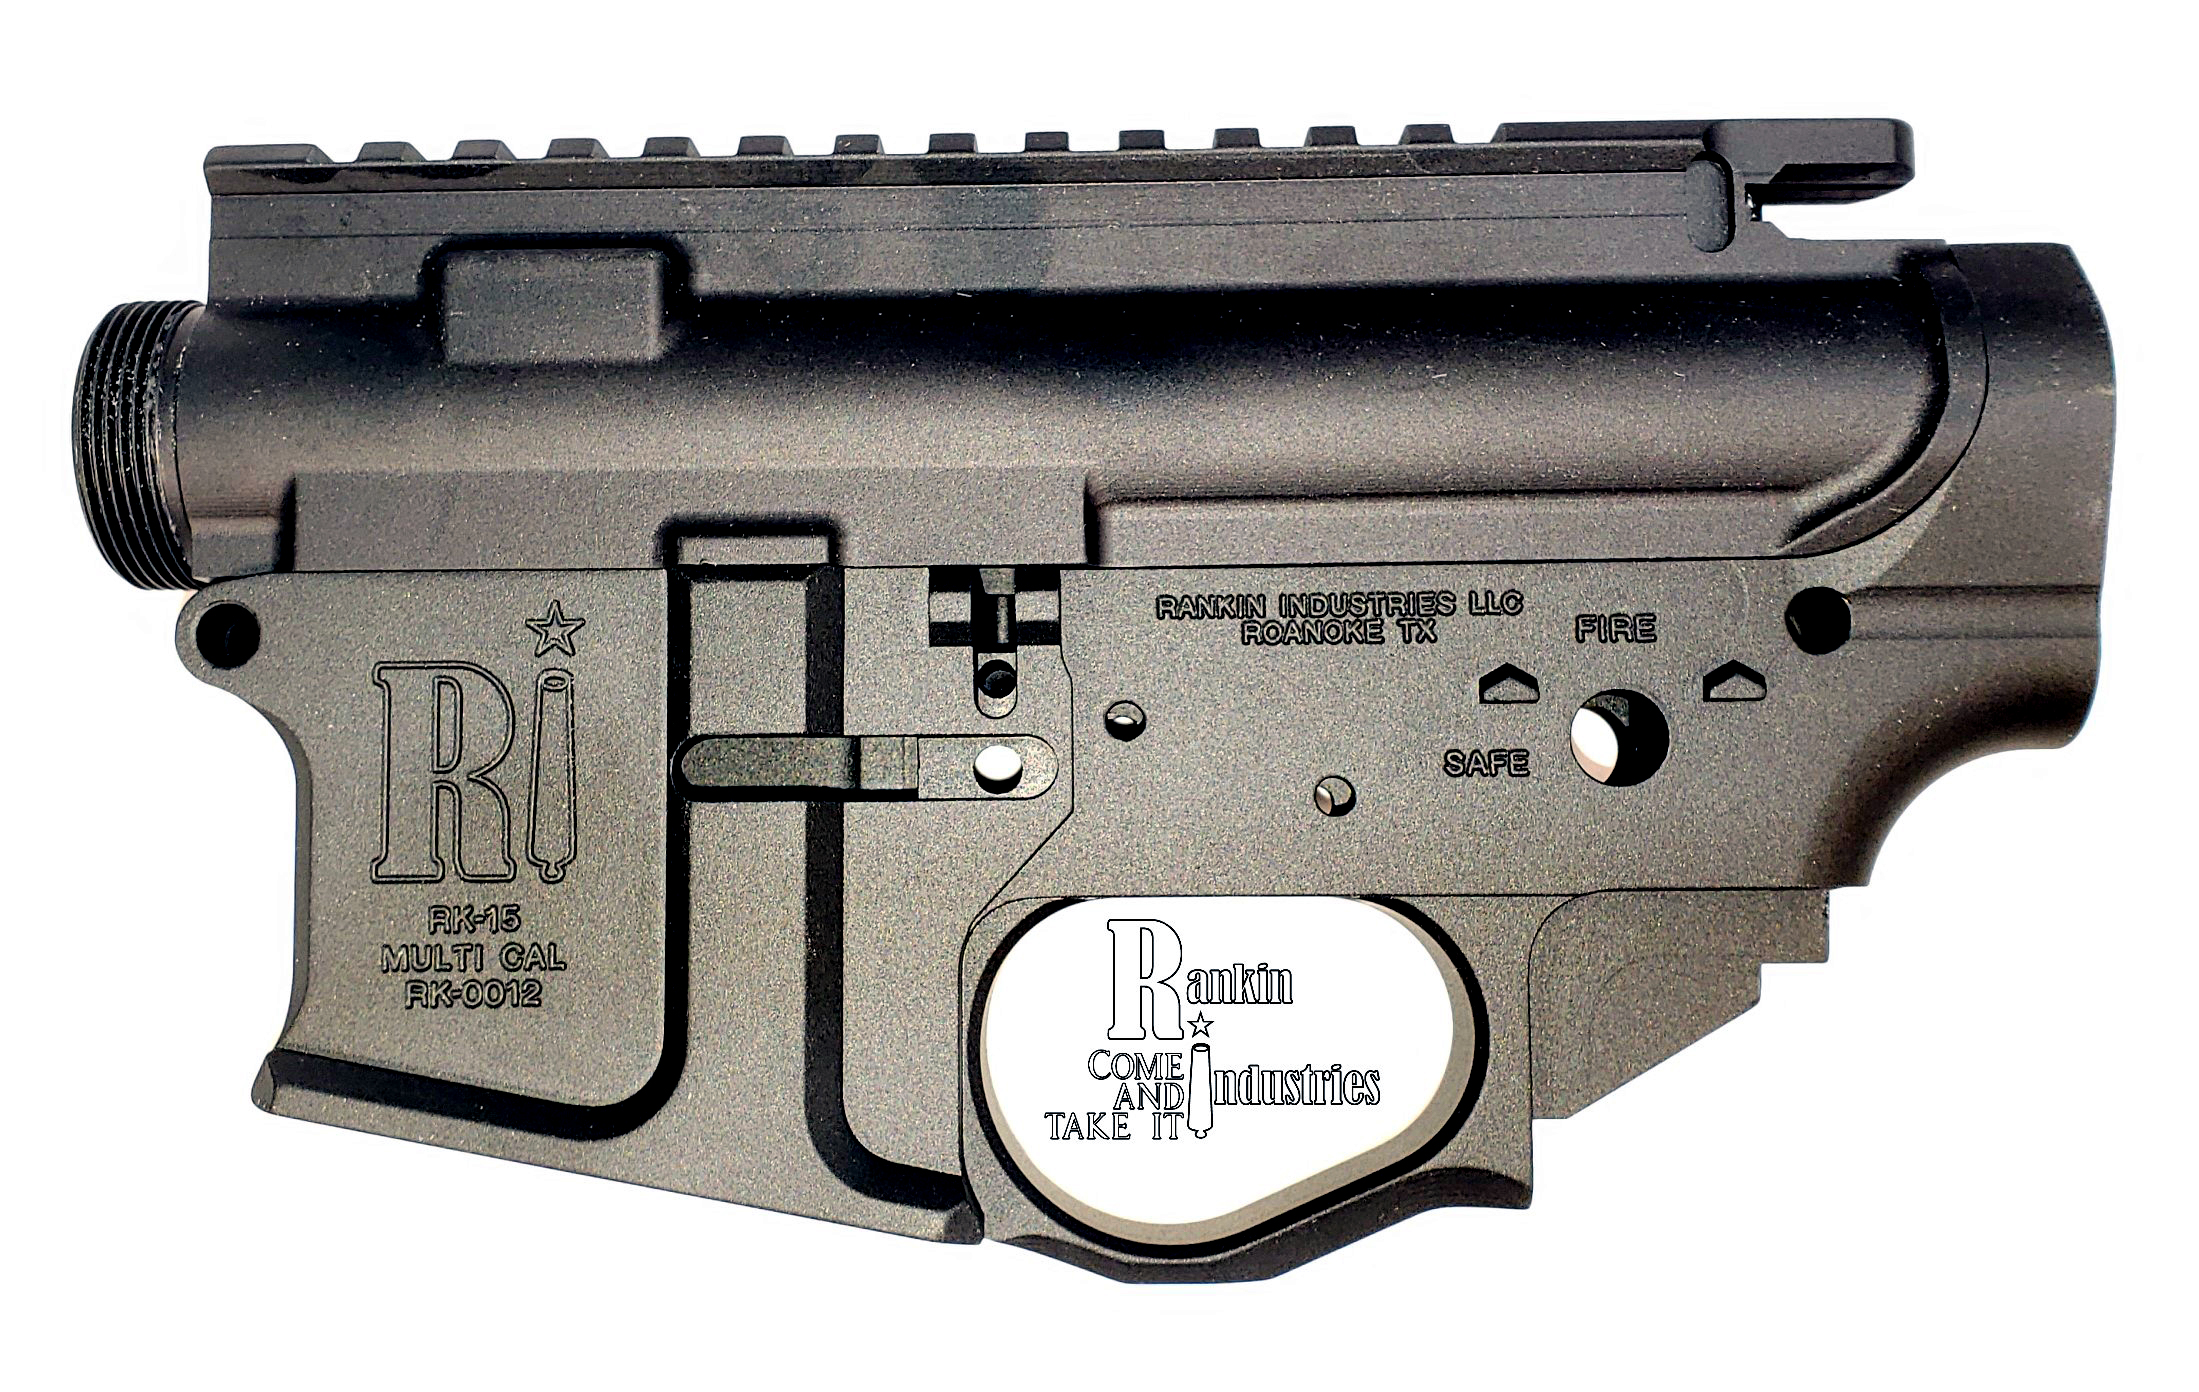 9mm ar upper and ar15 lower receiver